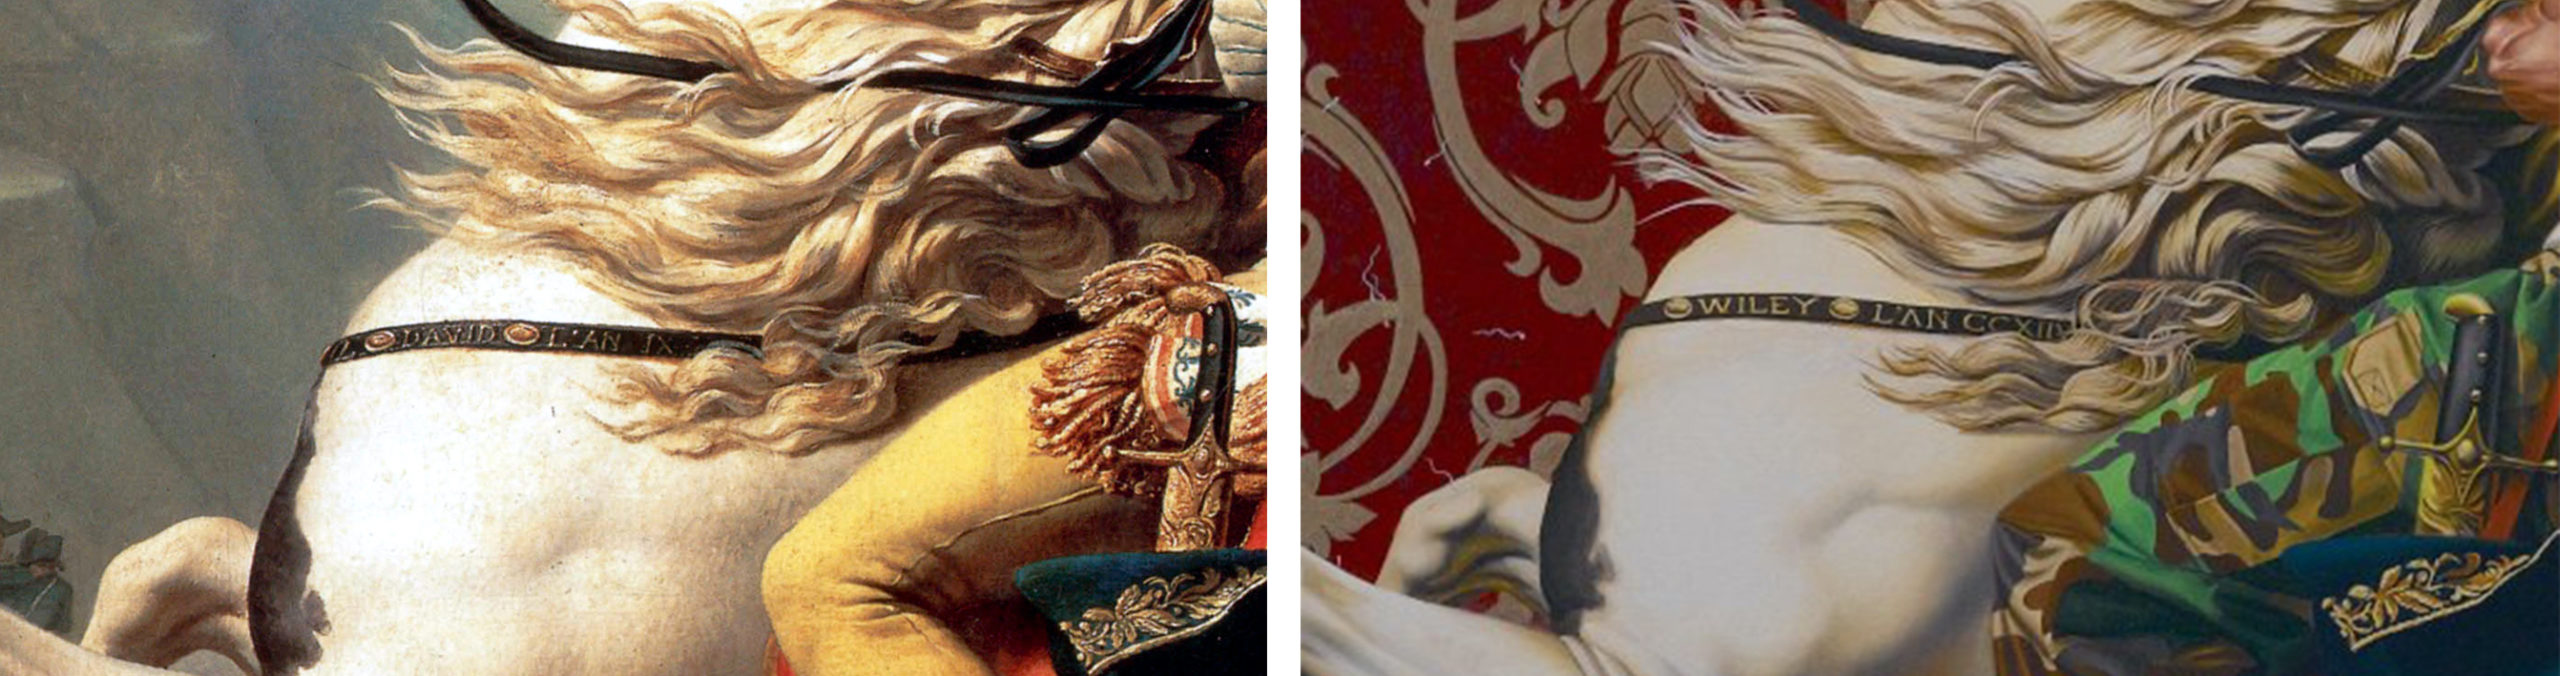 Left: Detail of David’s signature on the horse’s breastplate, Jacques-Louis David, Napoleon Crossing the Alps or Bonaparte at the St Bernard Pass, 1800–01 version, oil on canvas, 261 × 221 cm (Chateau de Malmaison, Rueil-Malmaison); right: Detail of Wiley’s signature on the horse’s breastplate, Kehinde Wiley, Napoleon Leading the Army over the Alps, 2005, oil on canvas, 274.3 x 274.3 cm (Brooklyn Museum of Art, New York) © Kehinde Wiley